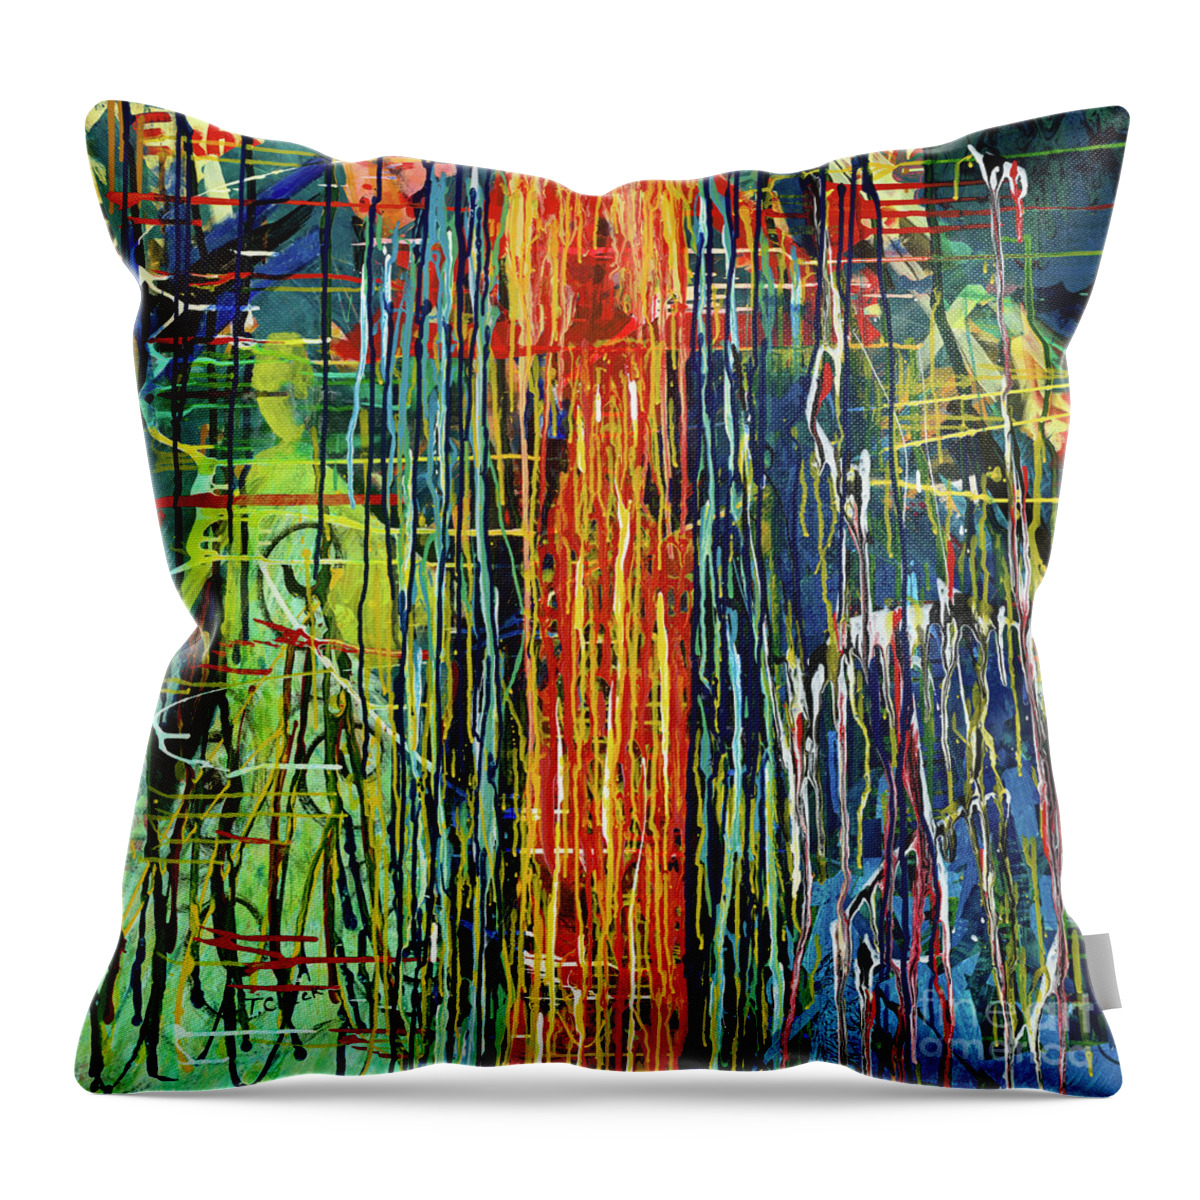 Verge Throw Pillow featuring the painting On the Verge by Tessa Evette